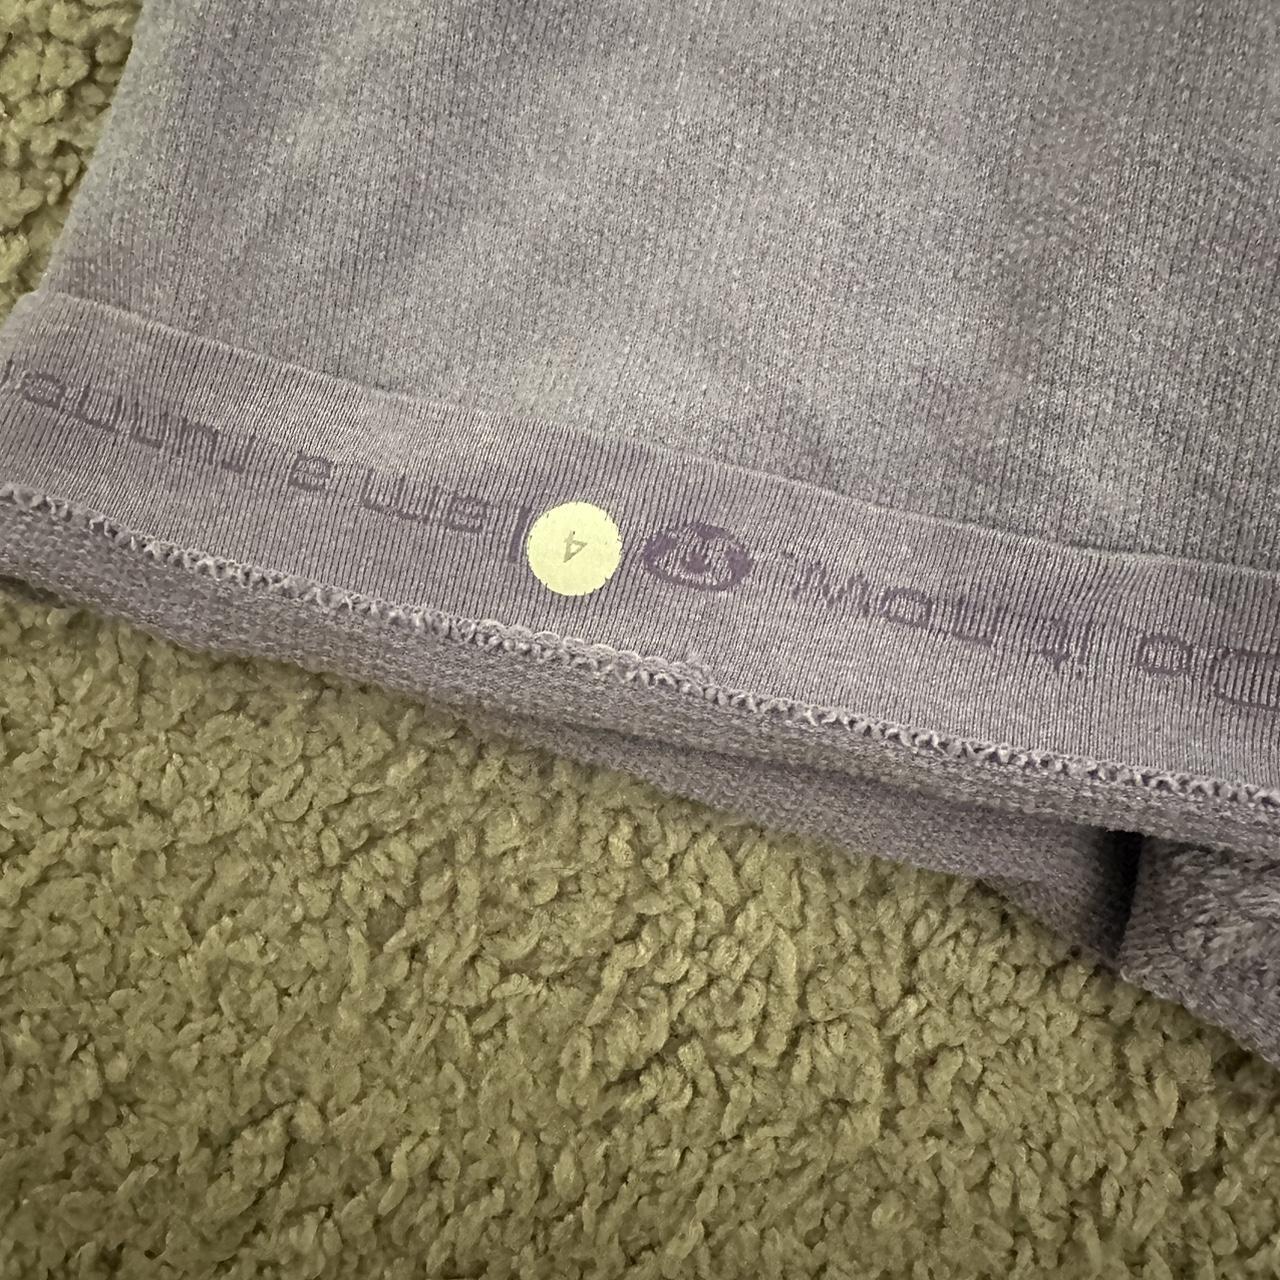 purple and grey lulu top small hole as shown(not... - Depop